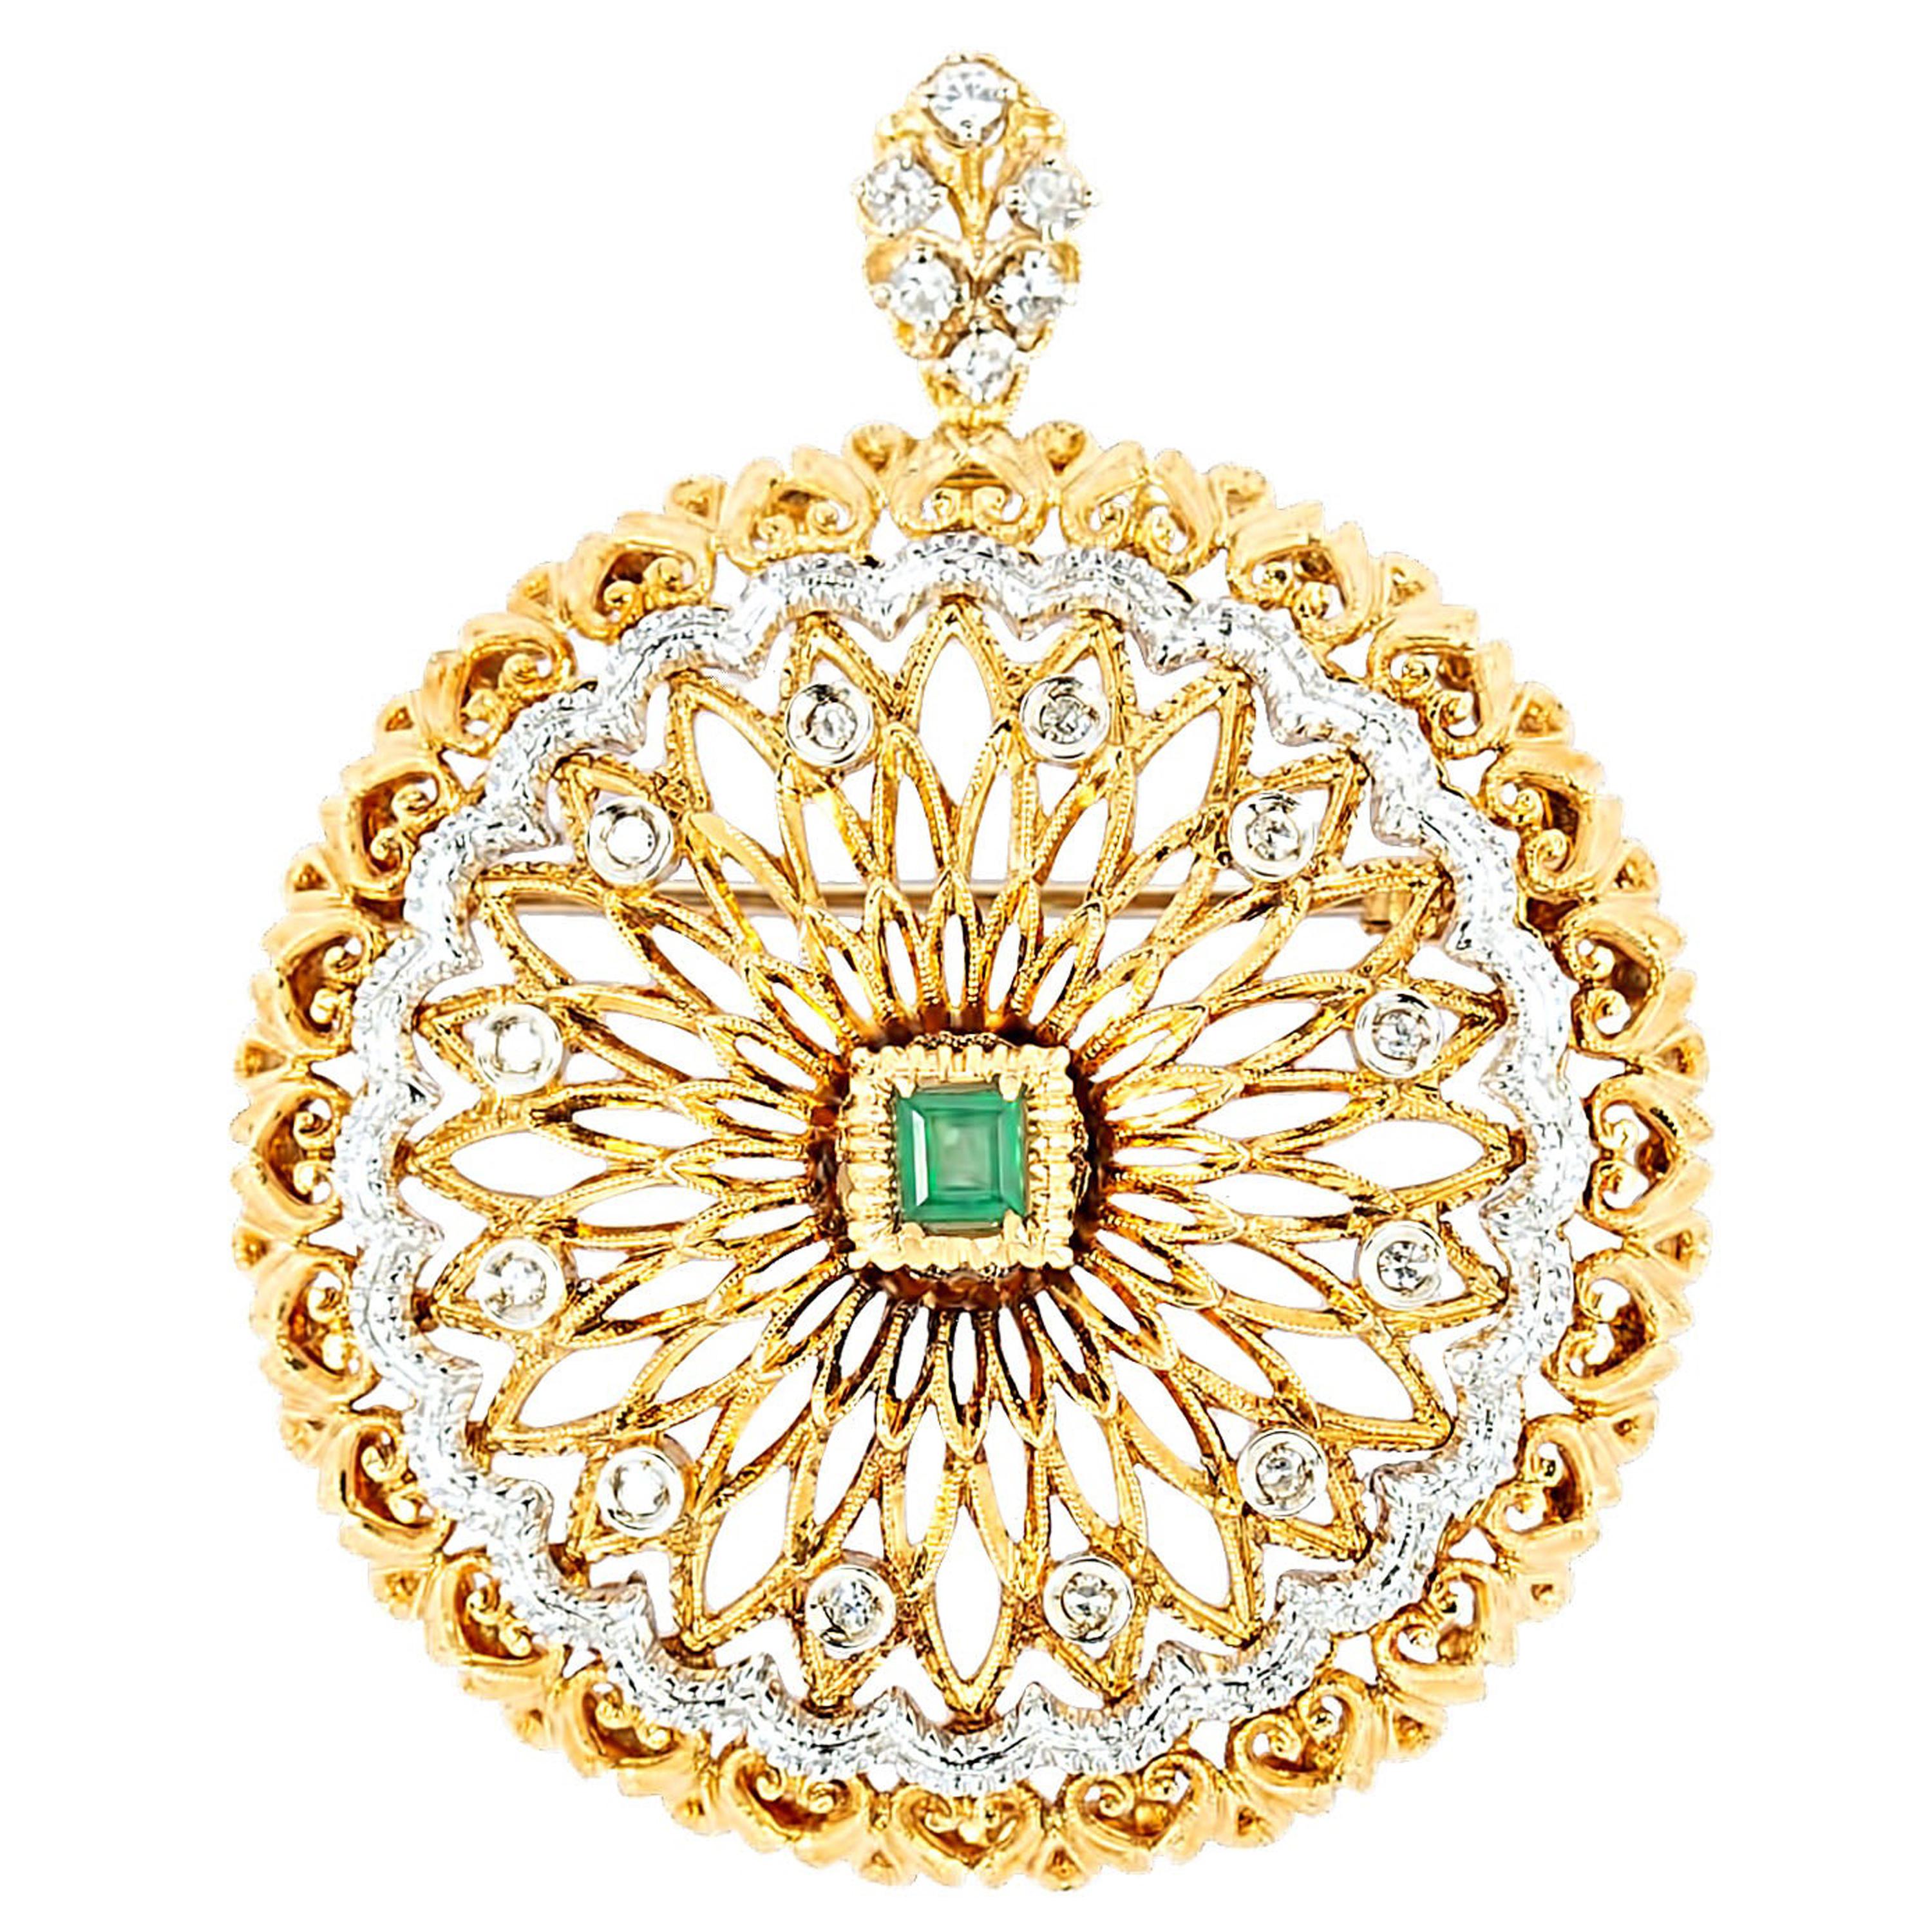 This versatile piece features a gorgeous open work spherical design fabricated in 18 karat yellow and white gold highlighting a vibrant green emerald center weighing approximately .20 carats and brightened by a halo of twelve collet set round